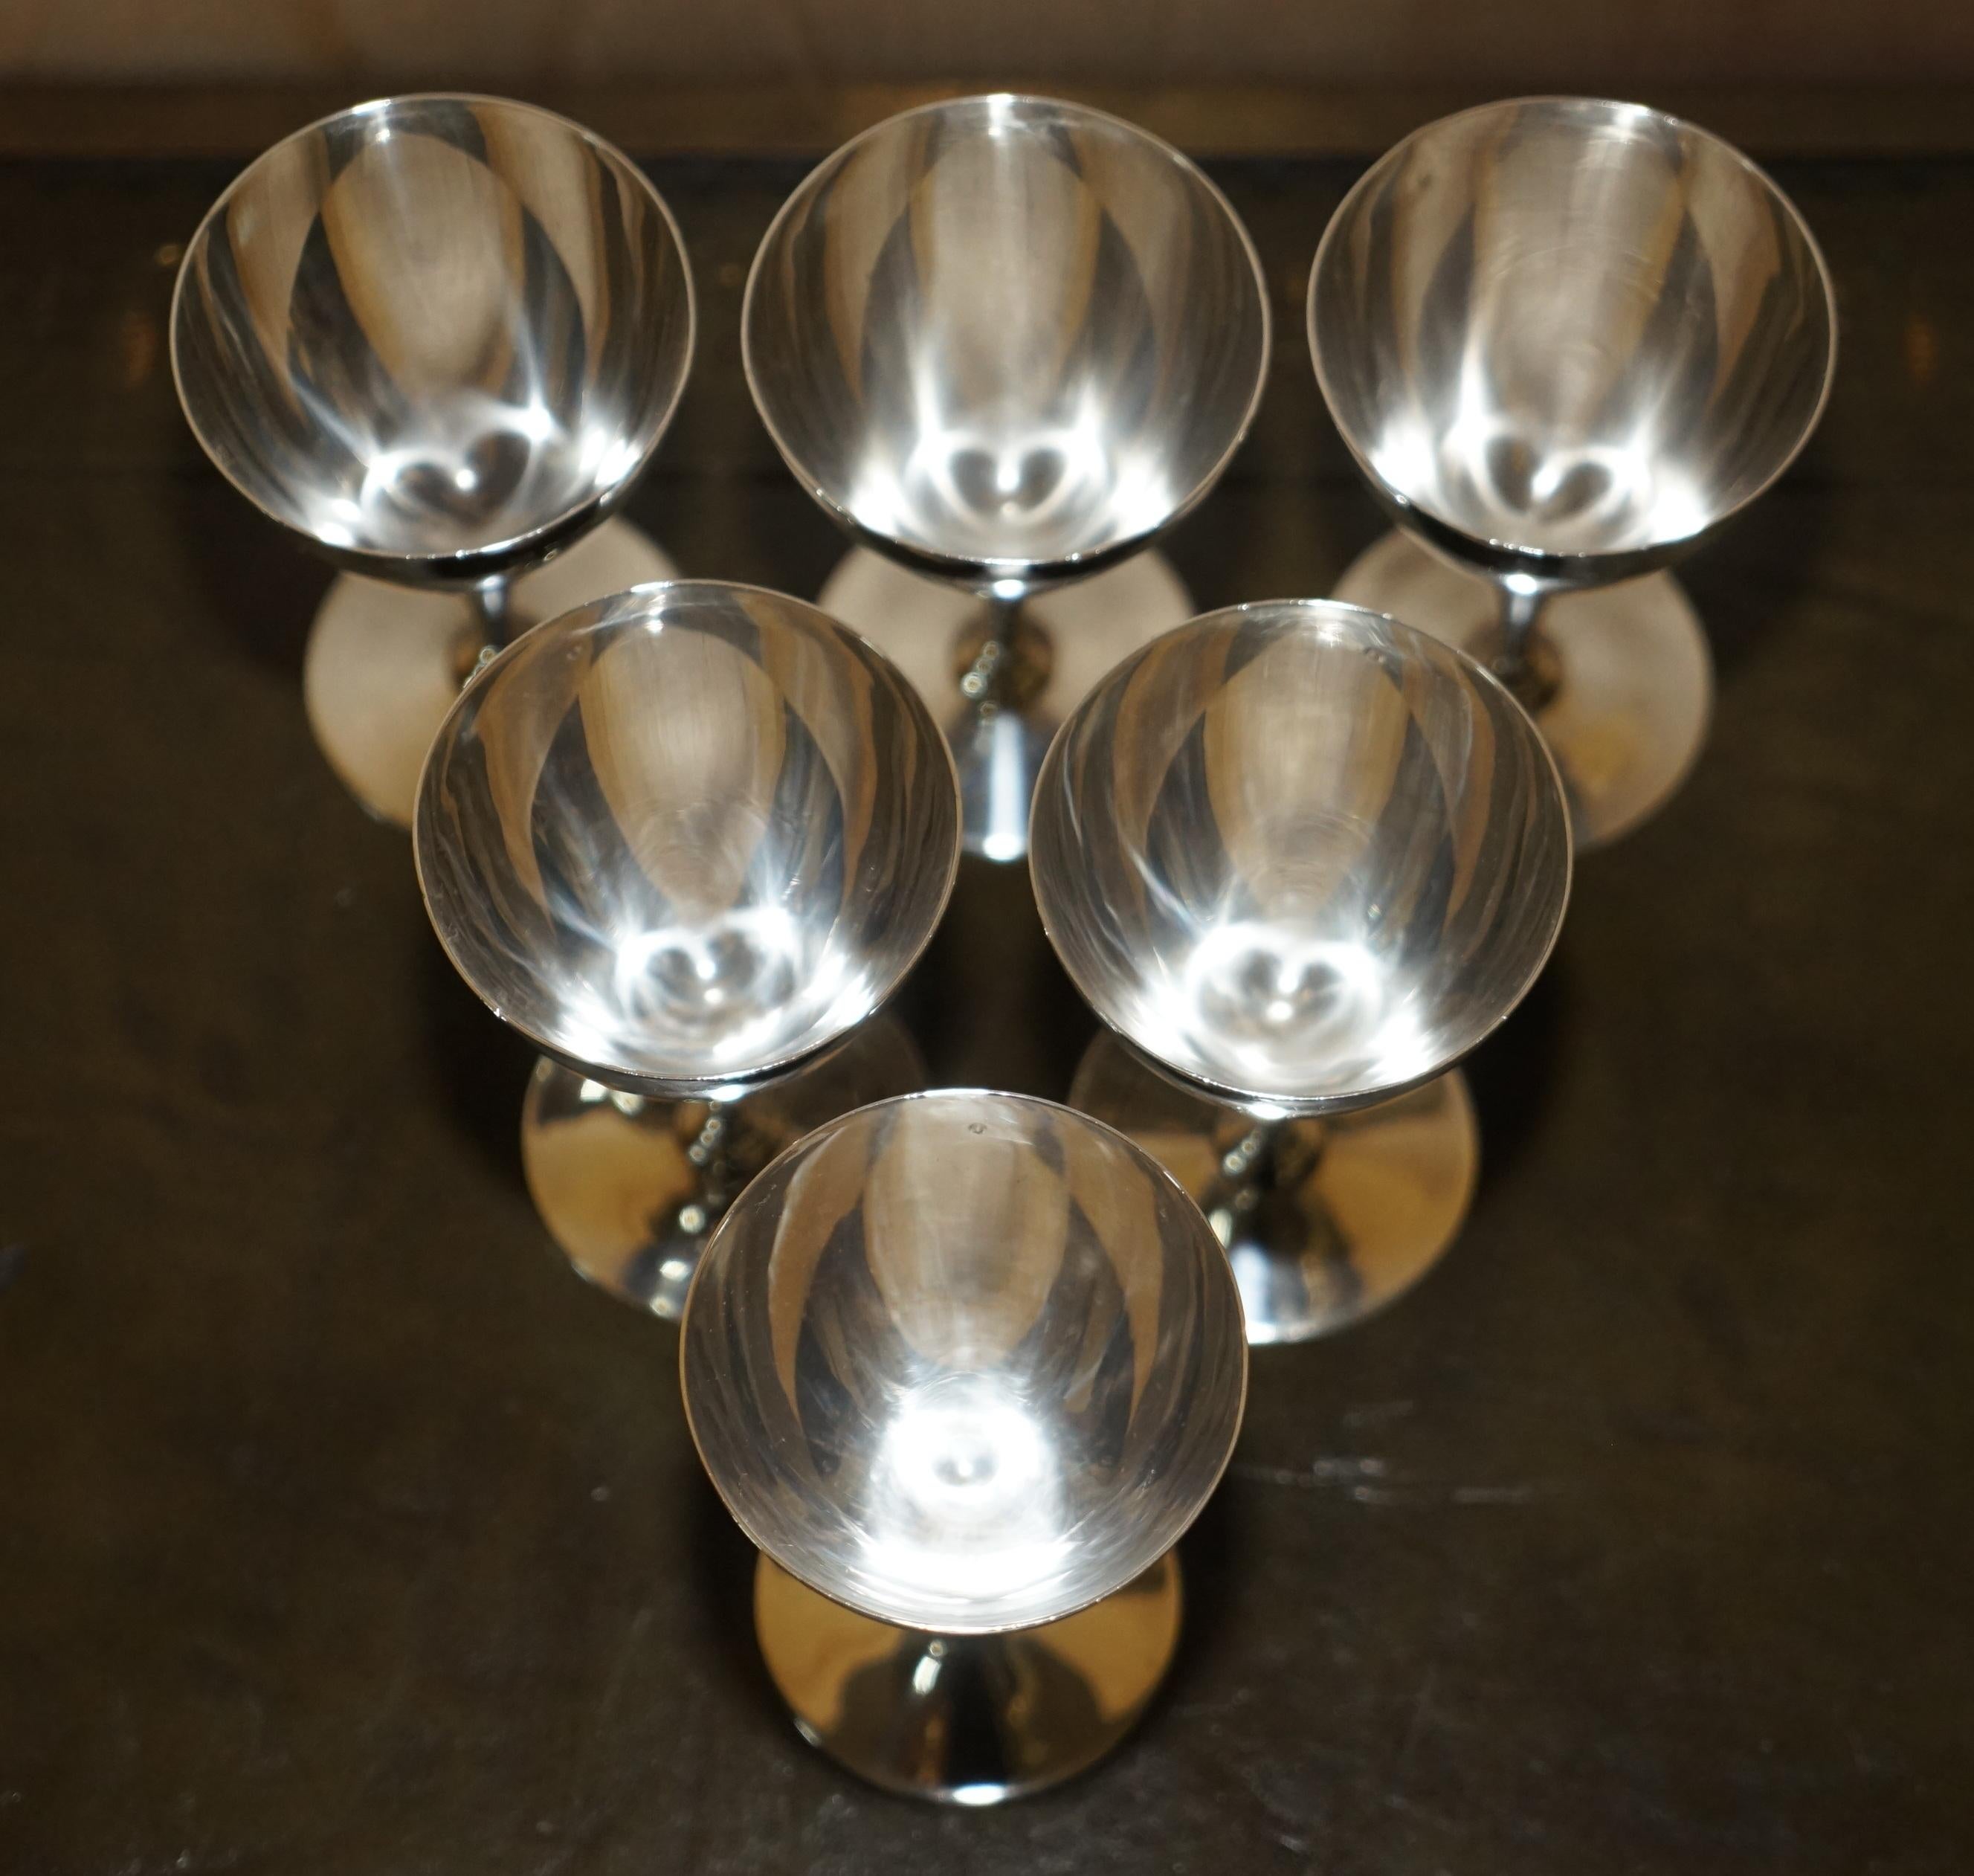 Royal House Antiques is delighted to offer for this suite of six original Tiffany & Co New York made Sterling Silver cup goblets which were retailed through Asprey London

These are a super decorative luxury suite of Sterling silver goblet cups,